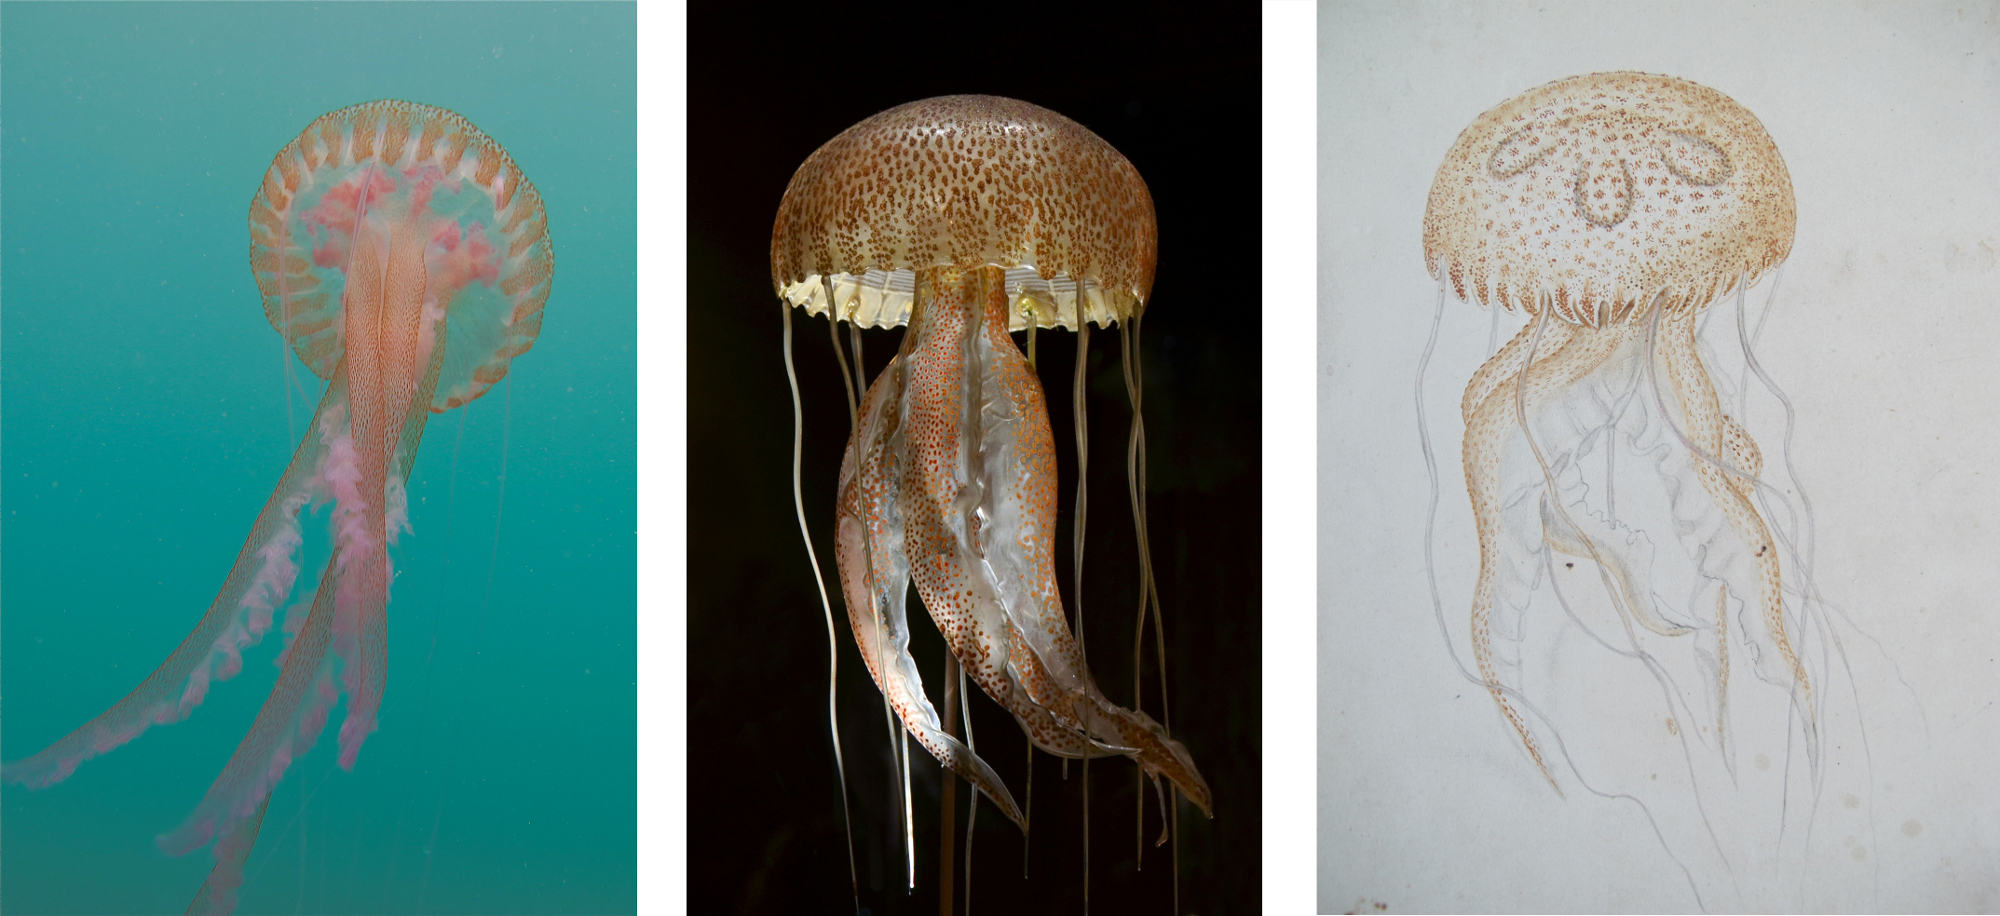 From left to right: A photo of a living mauve stinger (Pelagia noctiluca), a jellyfish found in the Mediterranean; the Blaschkas’ glass model; and a Blaschka watercolor. Photos by Drew Harvell and the Museum d’Histoire Naturelle, Geneva; watercolor courtesy of the Rakow Research Library, Corning Muséum of Glass, BIB ID: 122405. Image files courtesy of A Sea of Glass, by Drew Harvell